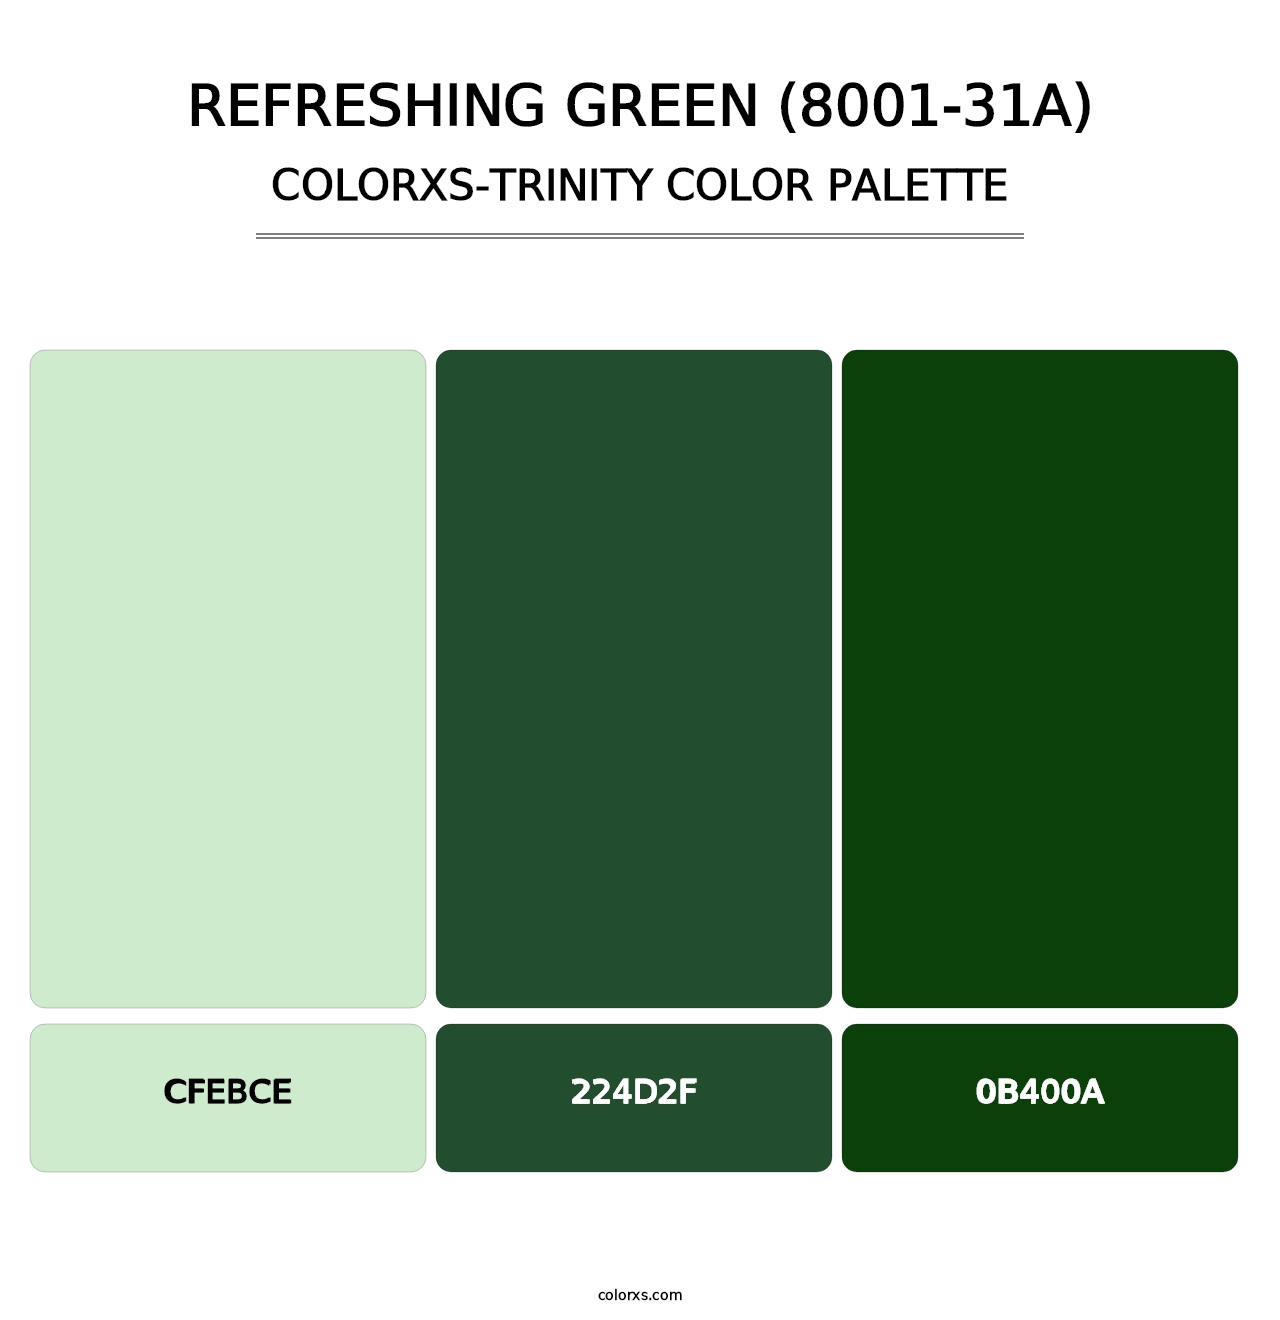 Refreshing Green (8001-31A) - Colorxs Trinity Palette